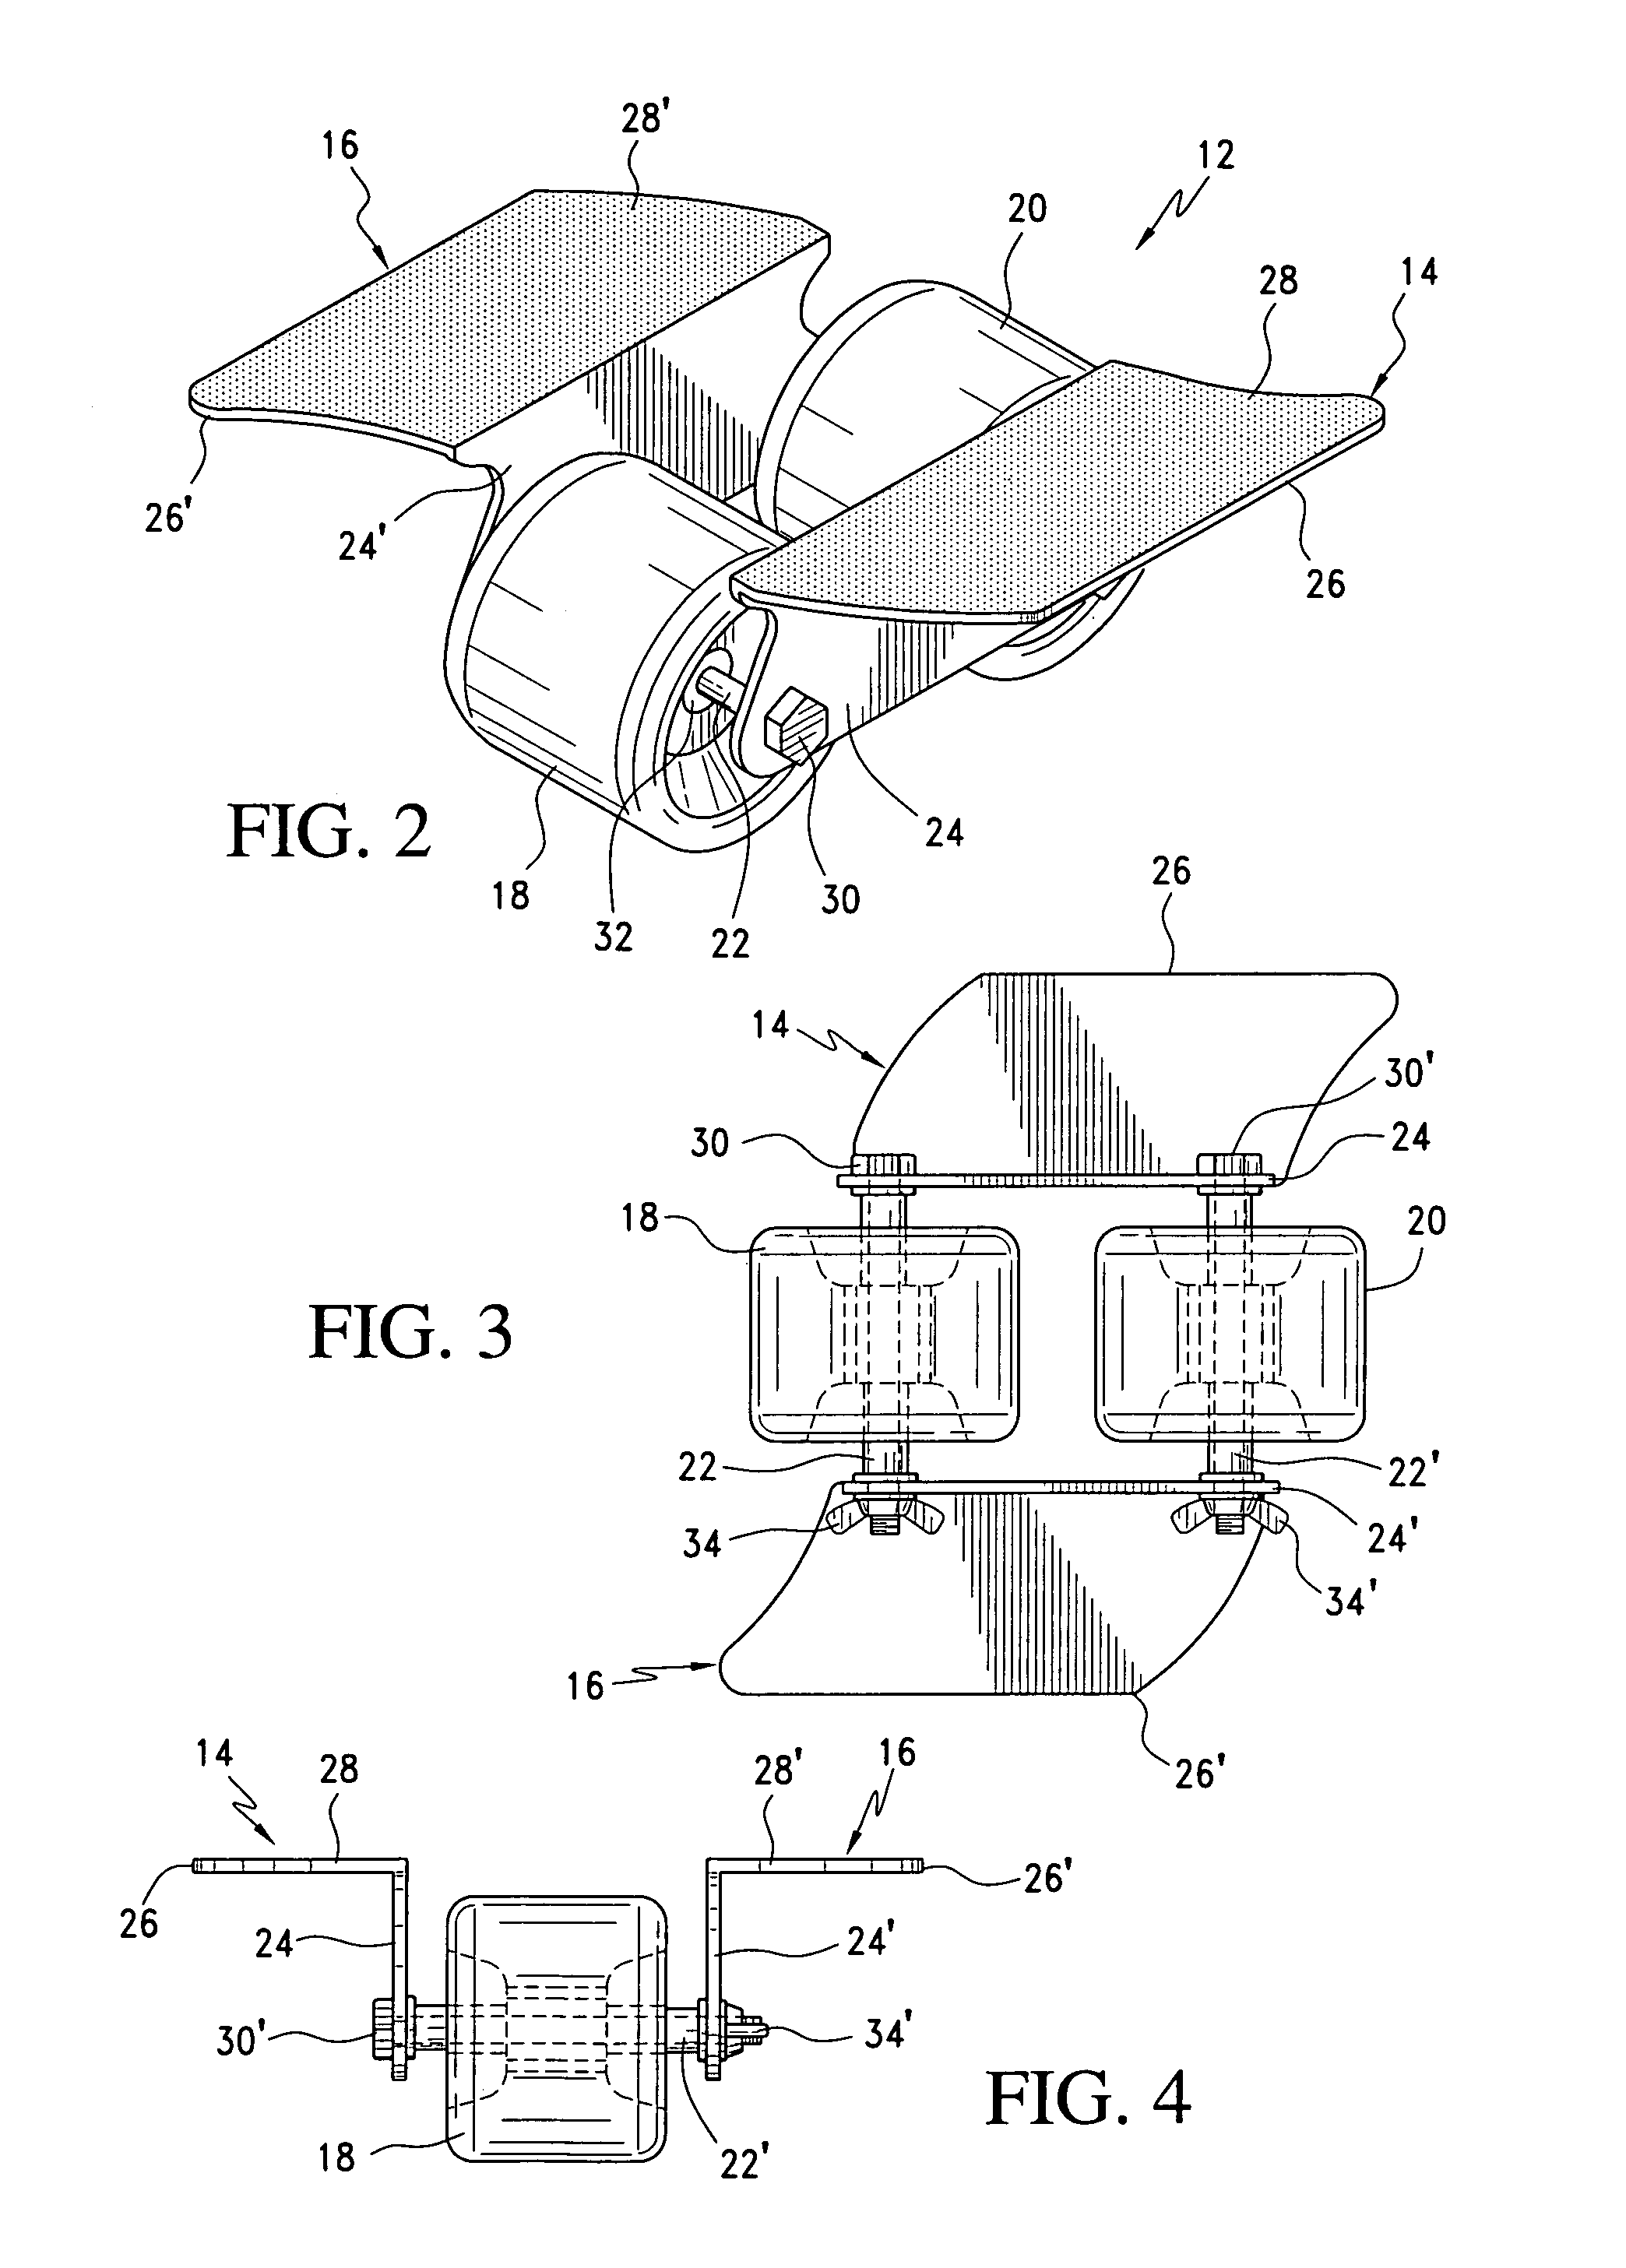 Personal transportation device for supporting a user's foot having multiple transportation attachments